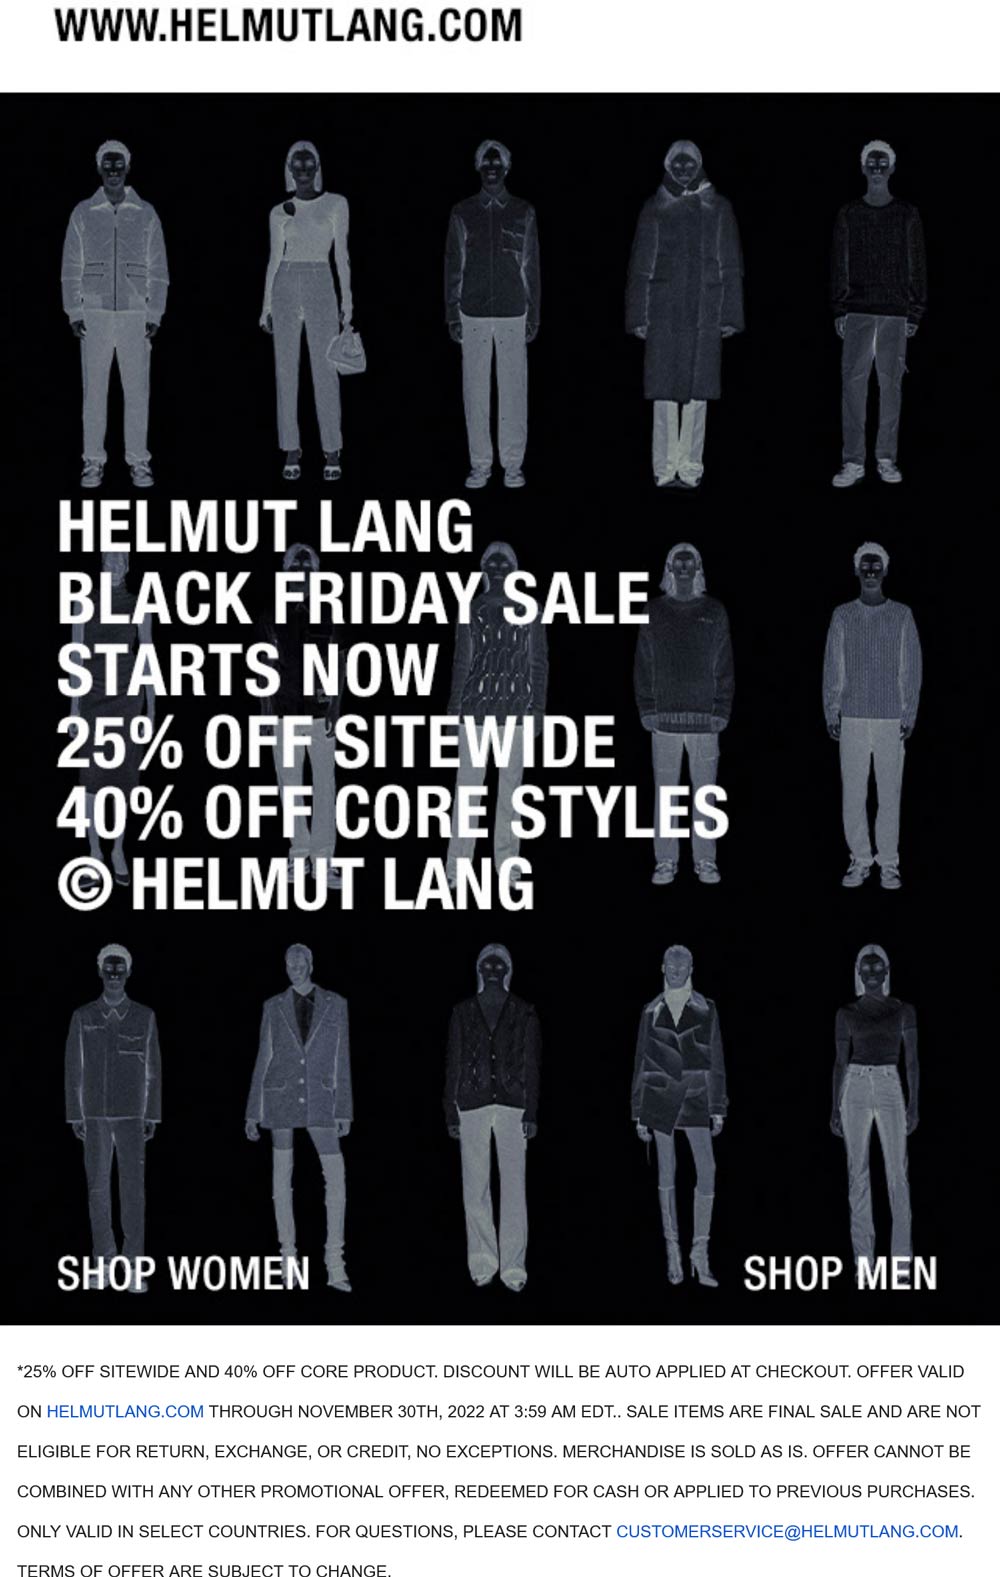 Helmut Lang coupons & promo code for [February 2023]